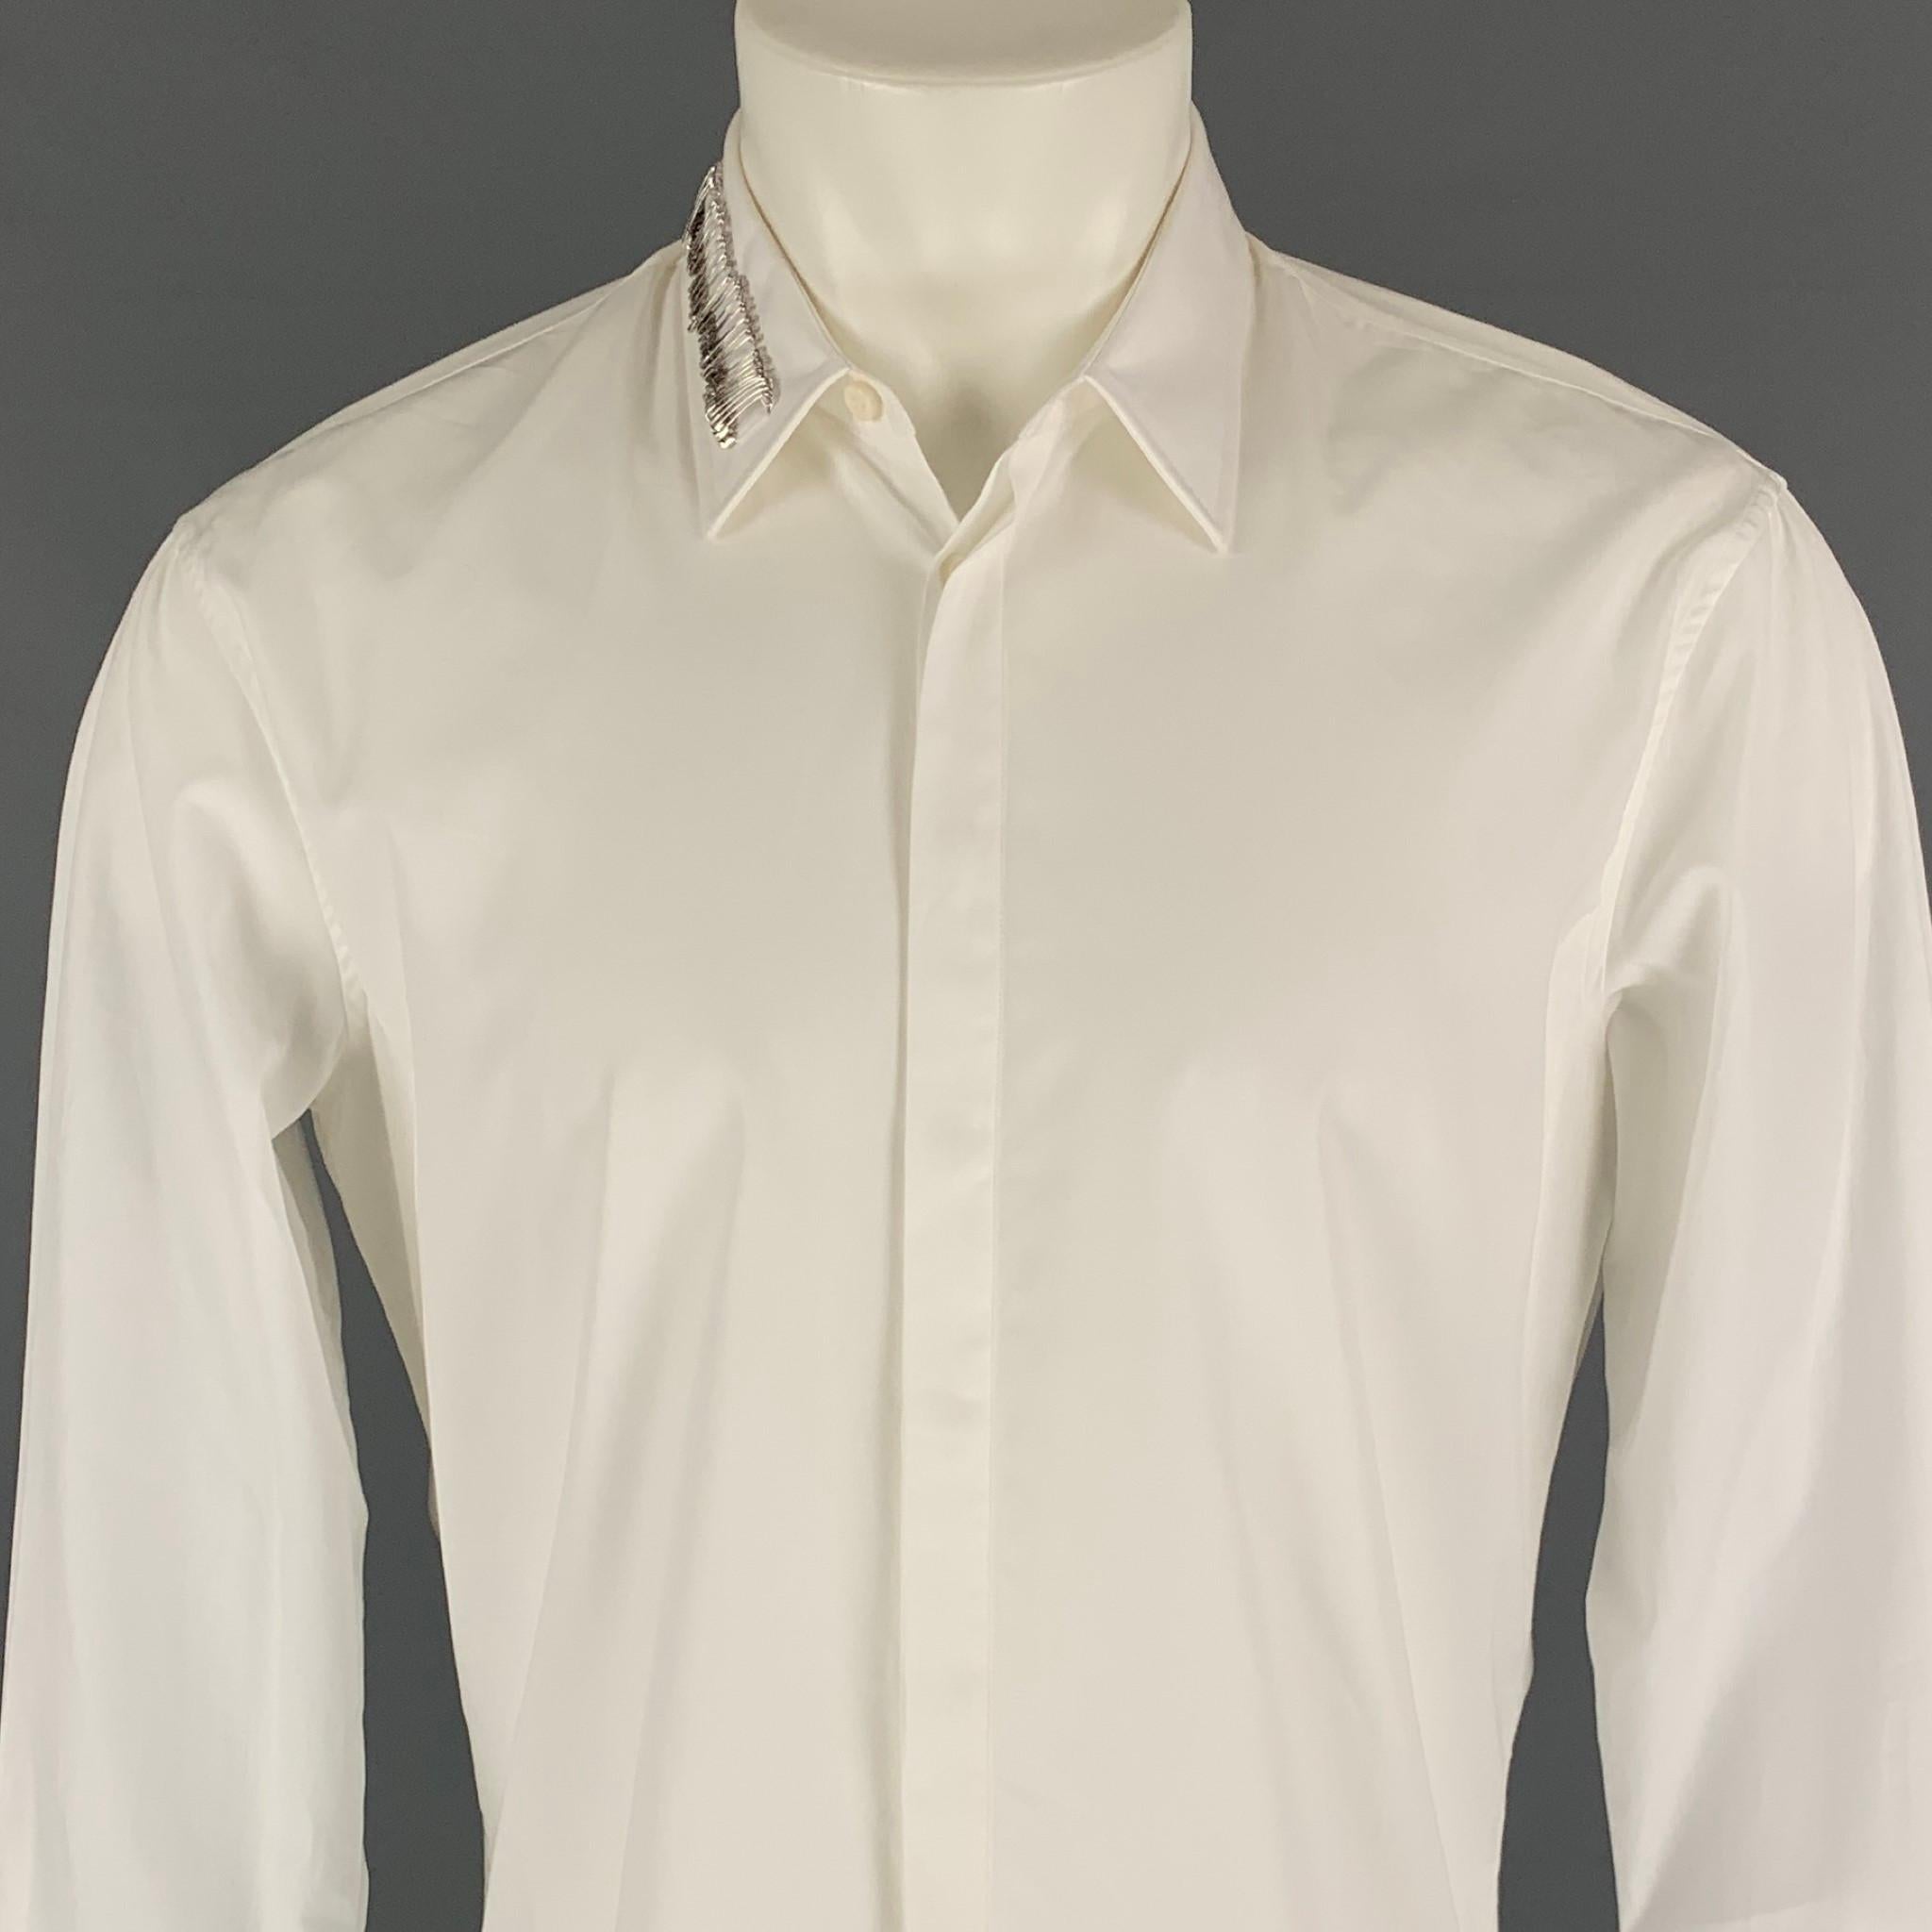 DSQUARED2 long sleeve shirt comes in a white cotton featuring a button up style, safety pin details, spread collar, and a hidden packet closure. Made in Italy. 

Very Good Pre-Owned Condition.
Marked: 48

Measurements:

Shoulder: 19 in.
Chest: 42